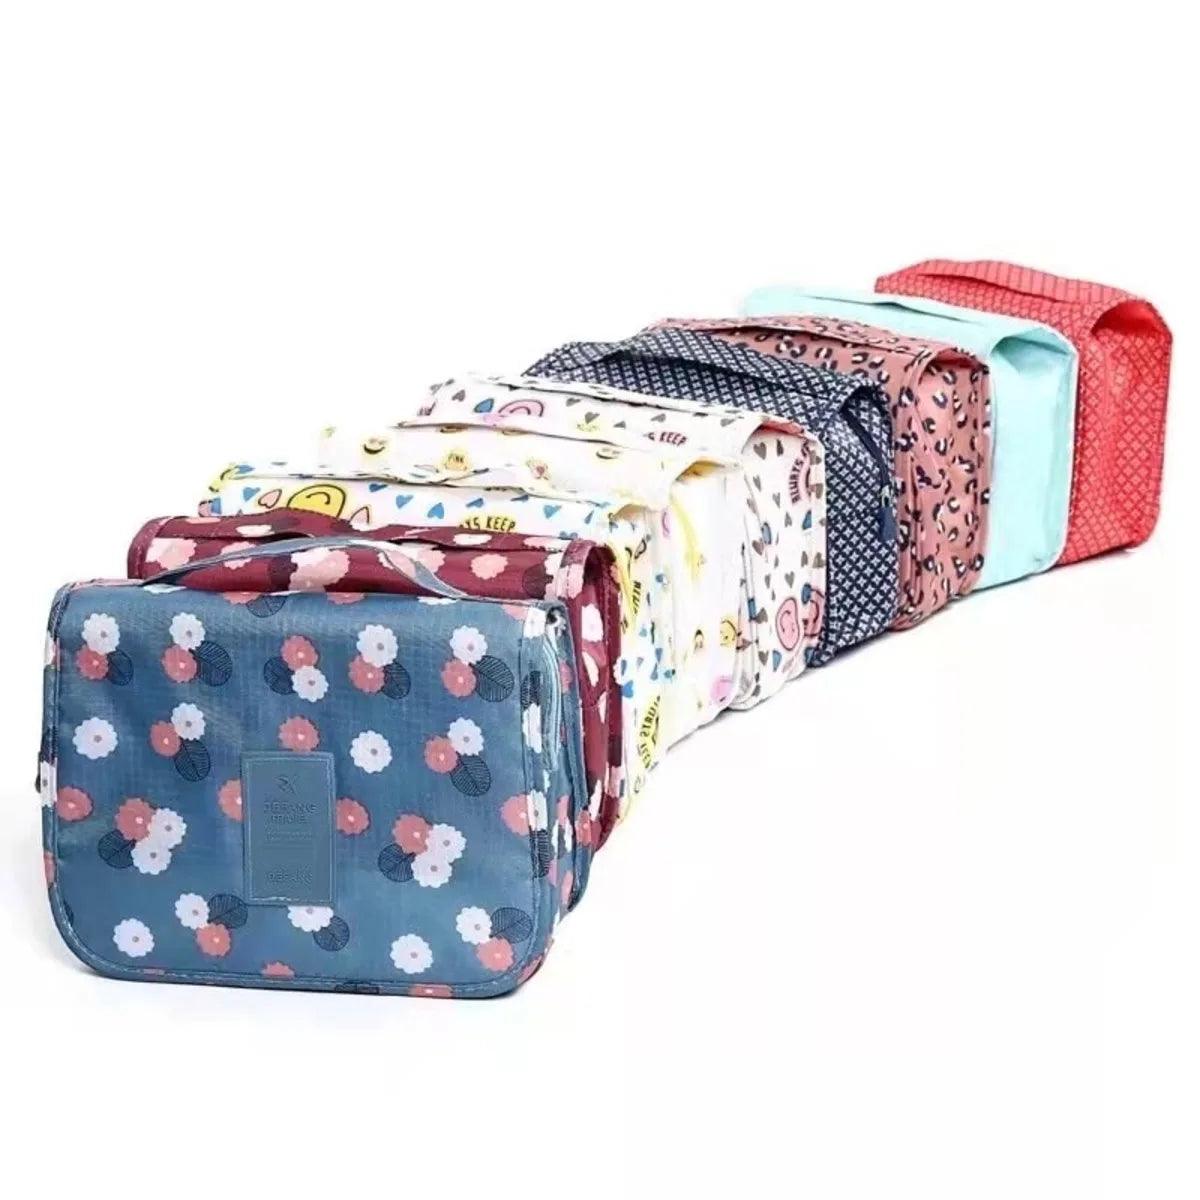 Makeup and Cosmetic Travel Bag with Assorted Colors - Stylish Necessaire for On-the-Go Essentials  ourlum.com   